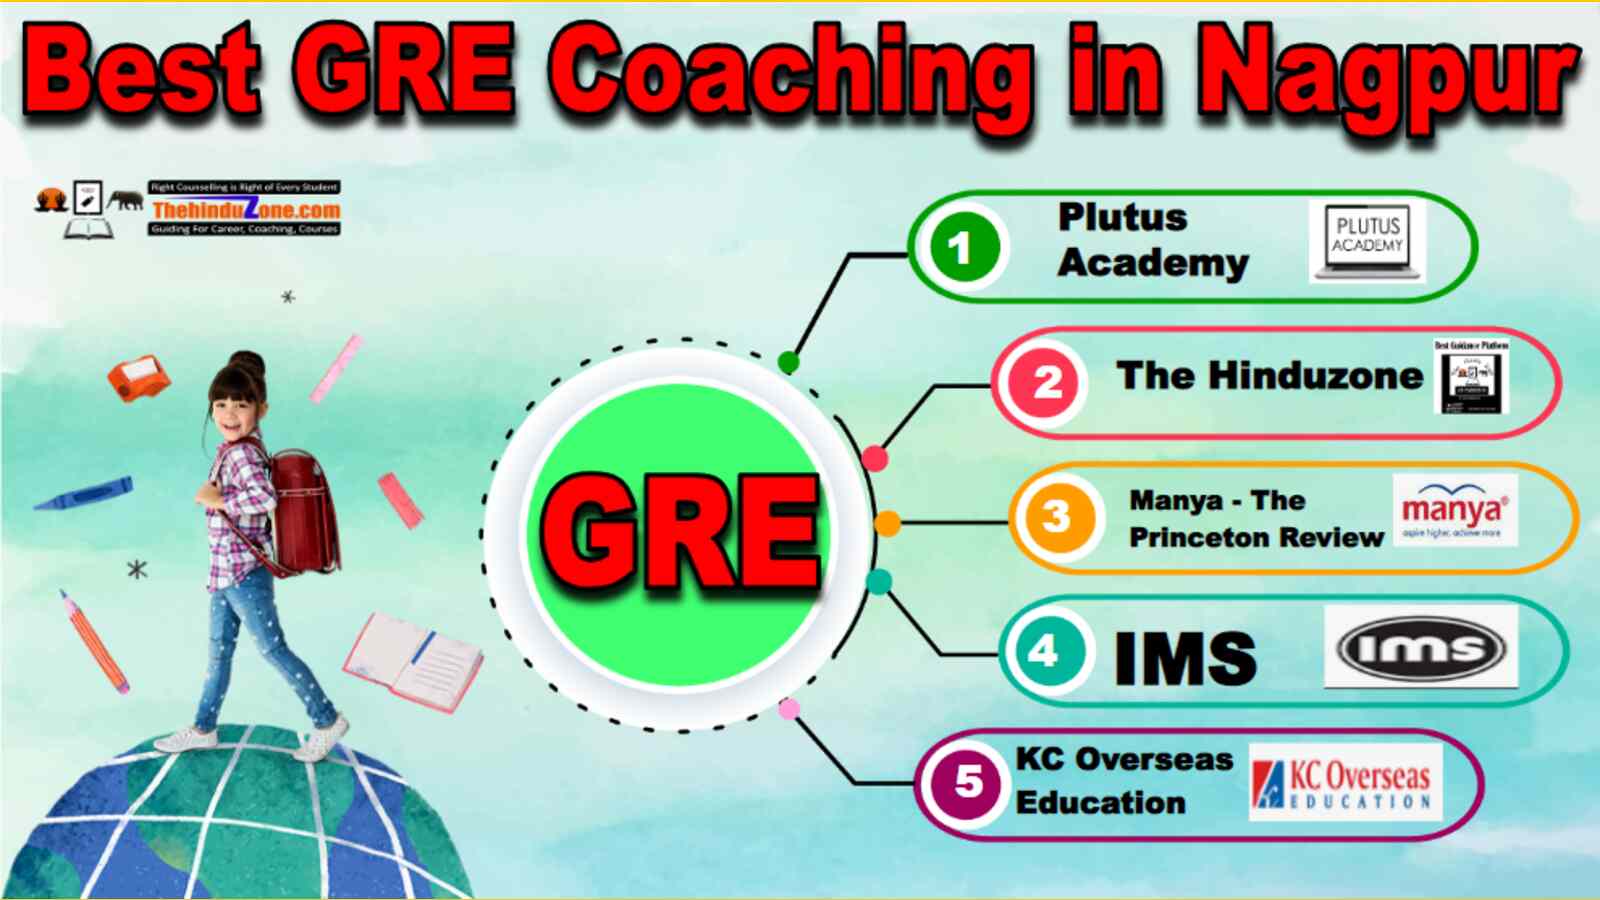 Best GRE Coaching In Nagpur